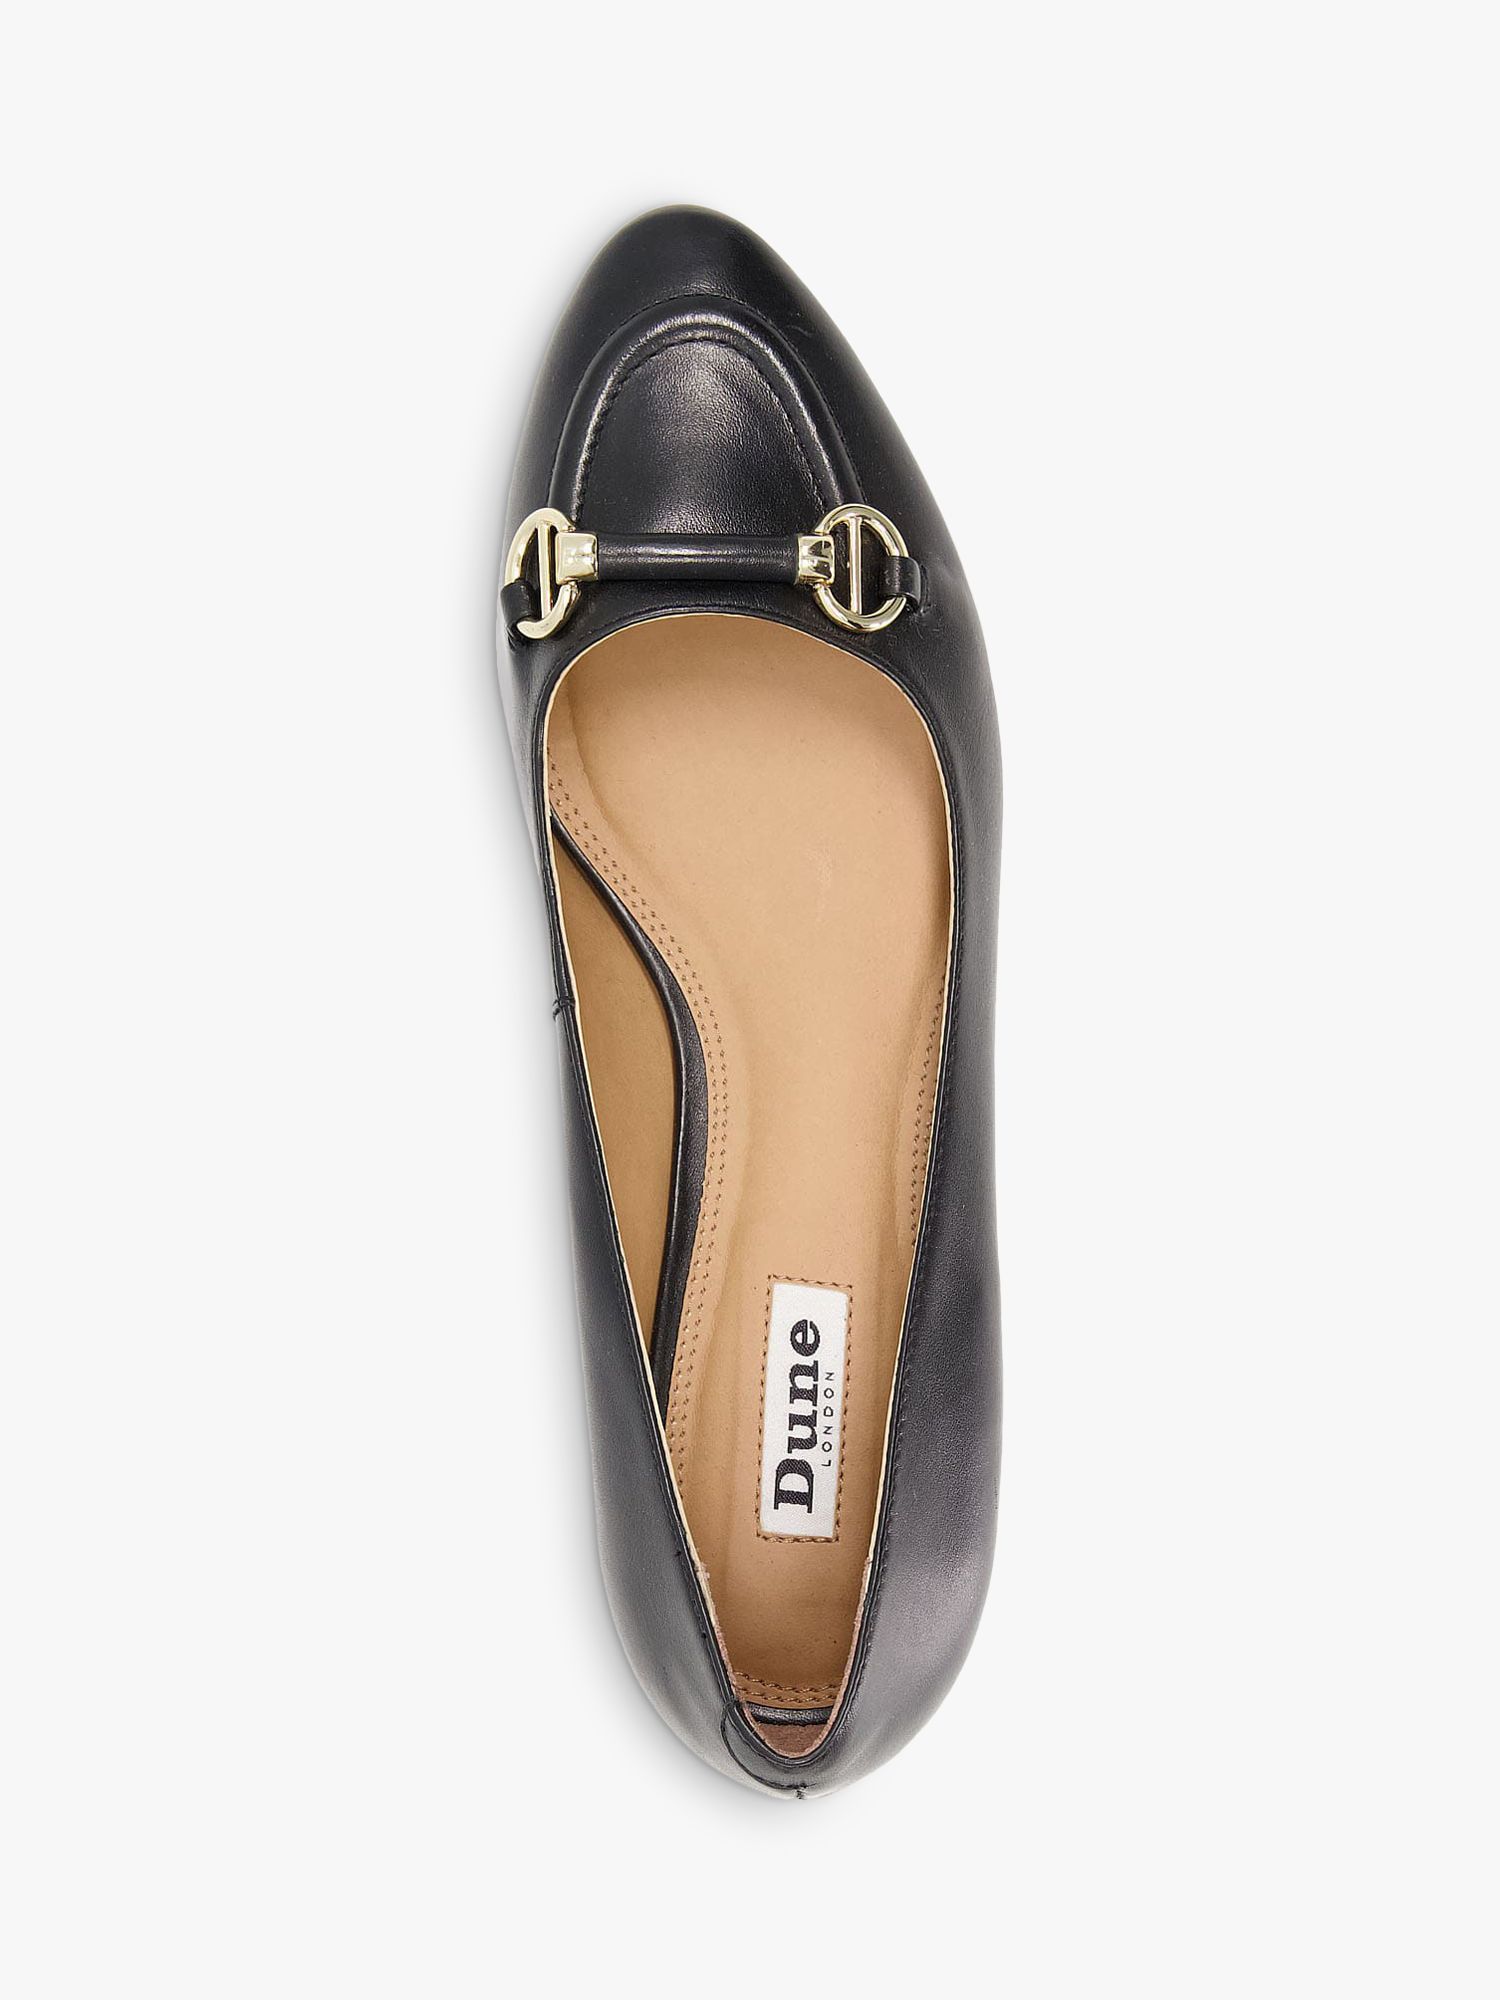 Dune Hippy Leather Low Block Heel Loafers, Black at John Lewis & Partners